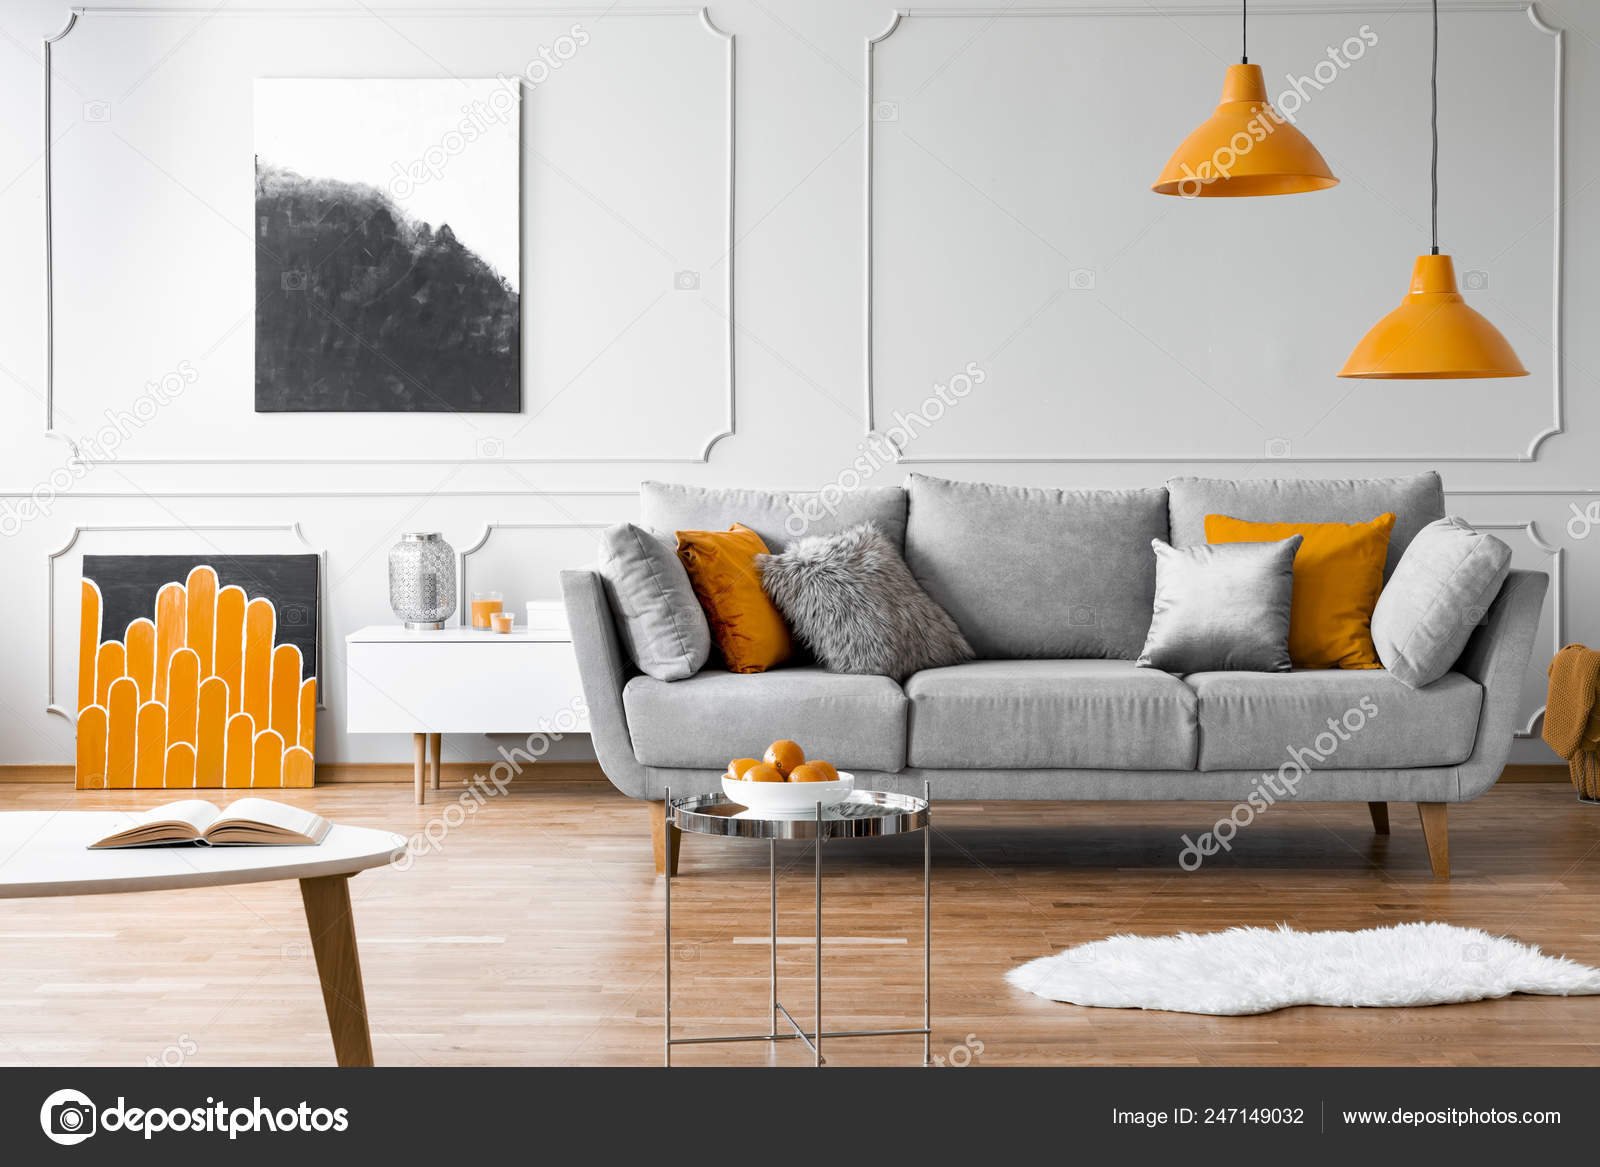 Orange Lamps Grey Couch Living Room Interior Posters Silver Table Stock Photo C Photographee Eu 247149032